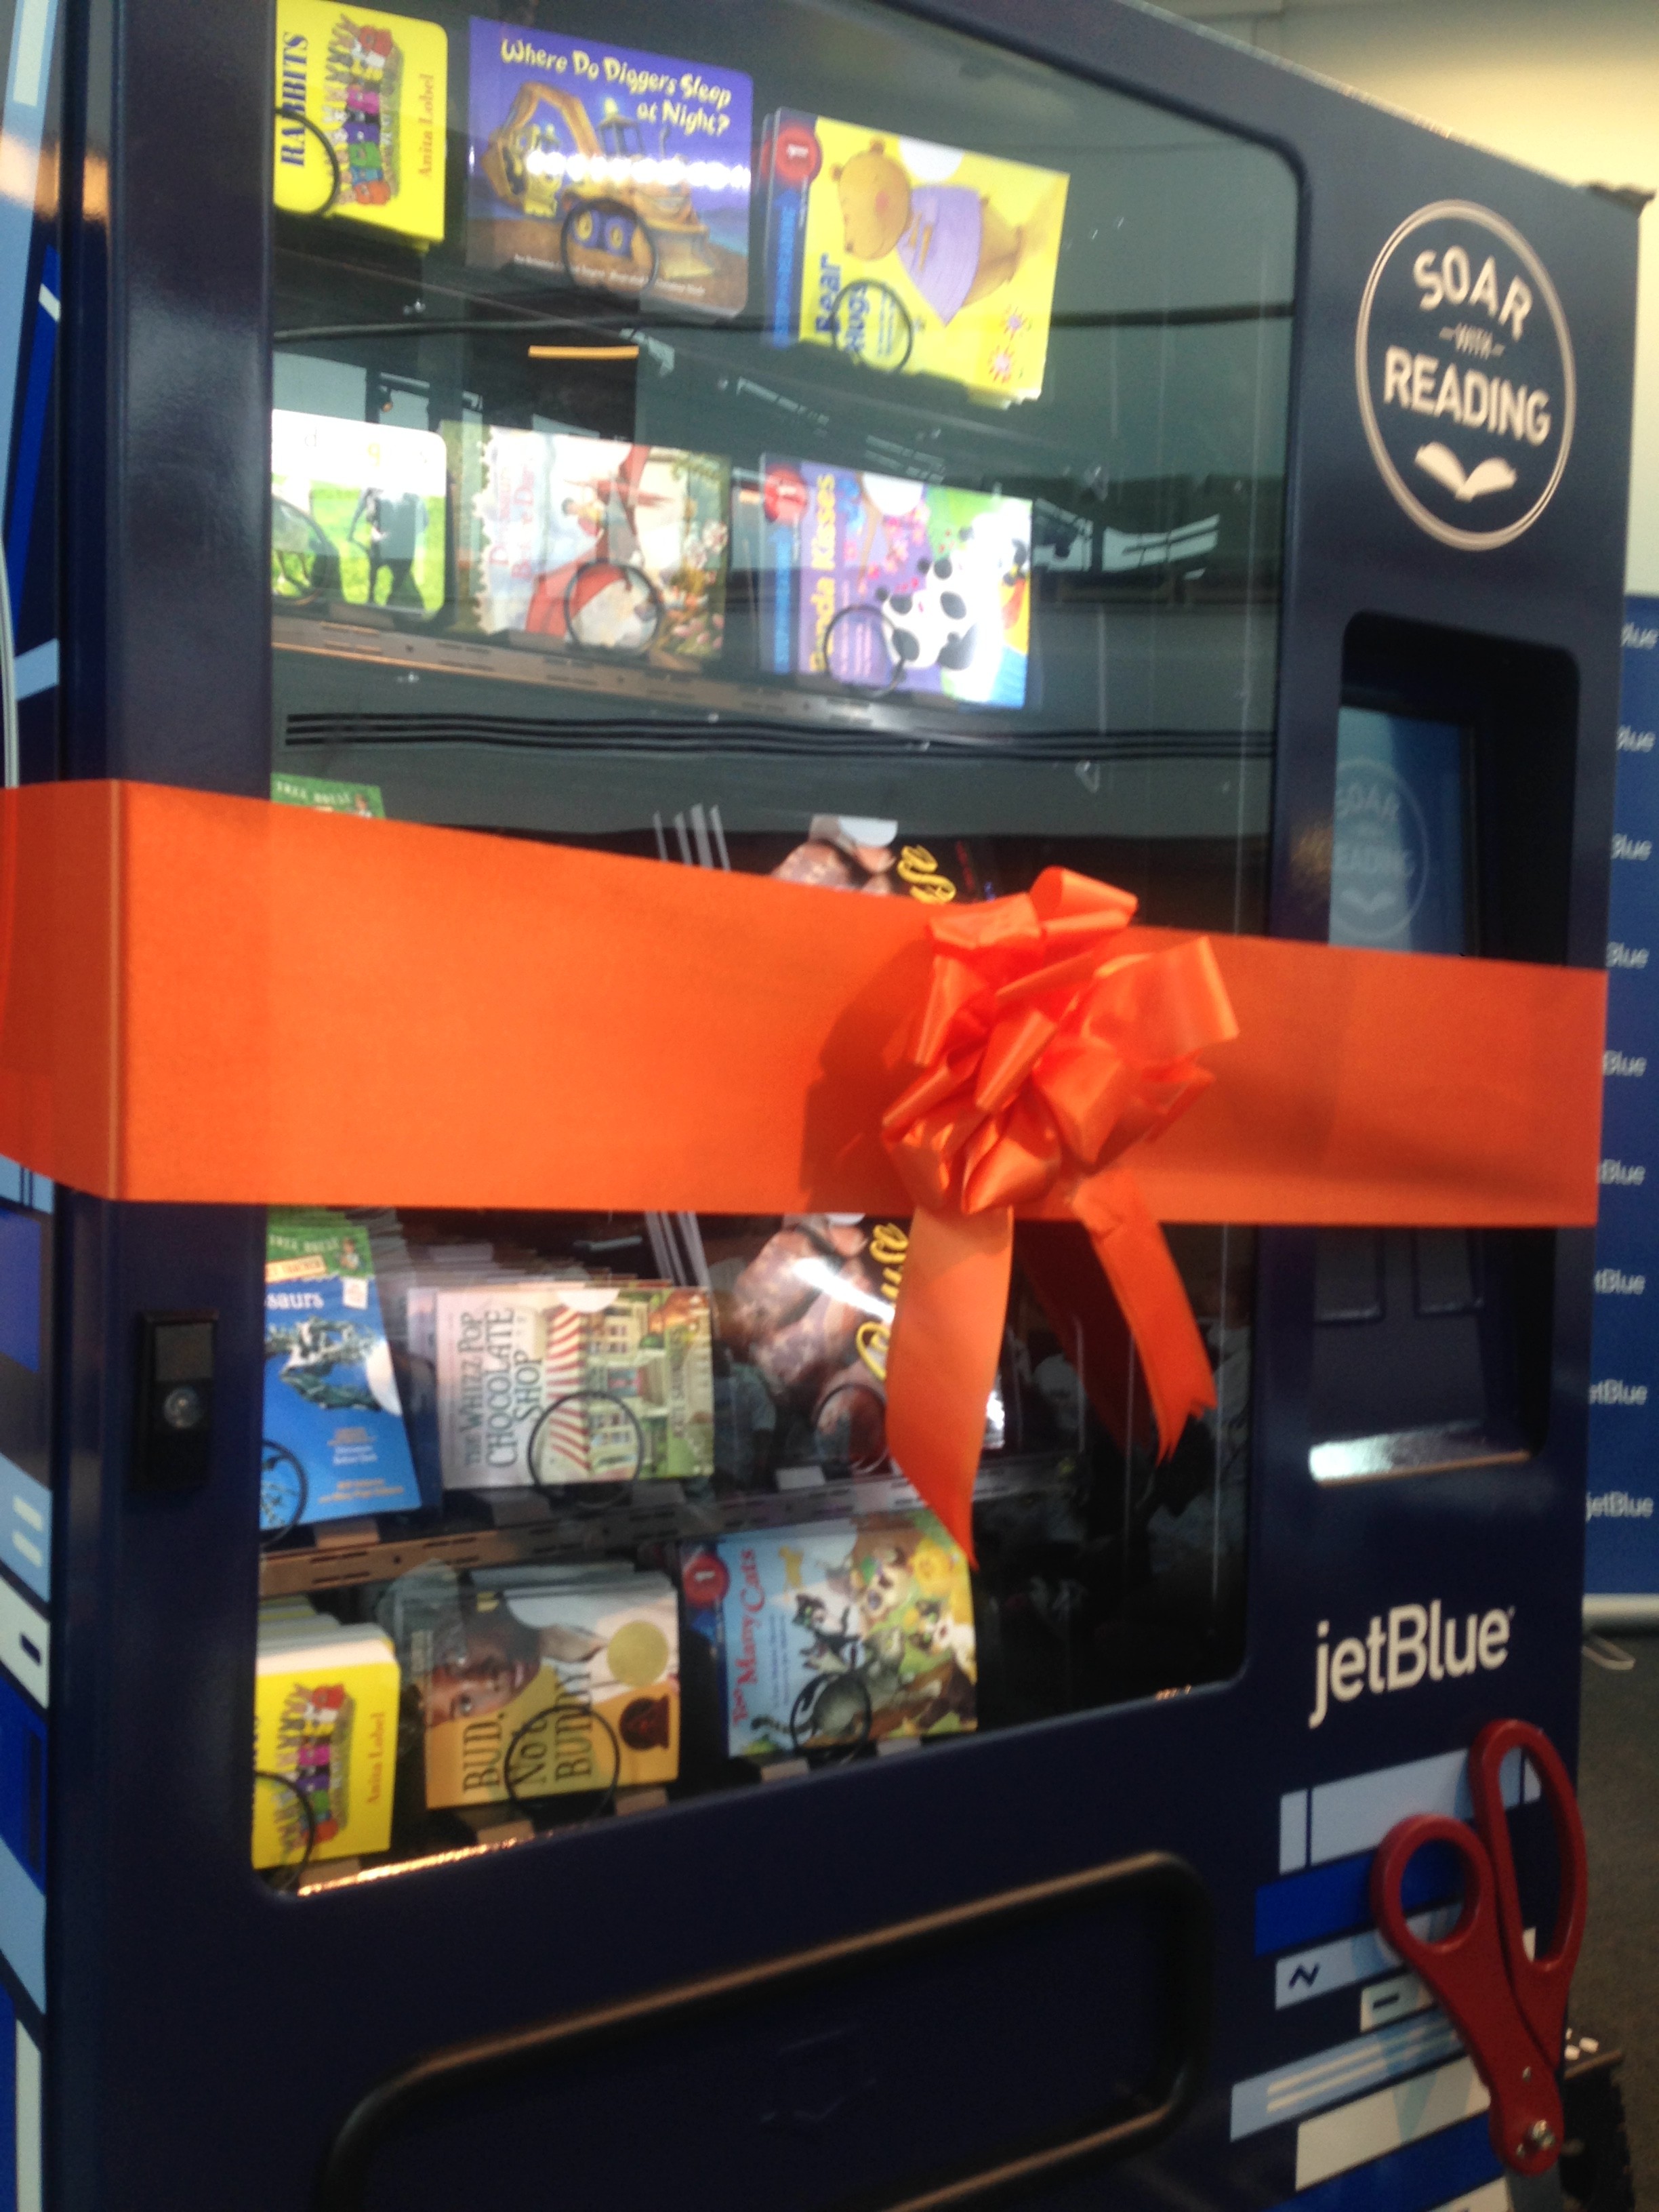 Vending machine aims to water ‘book deserts’